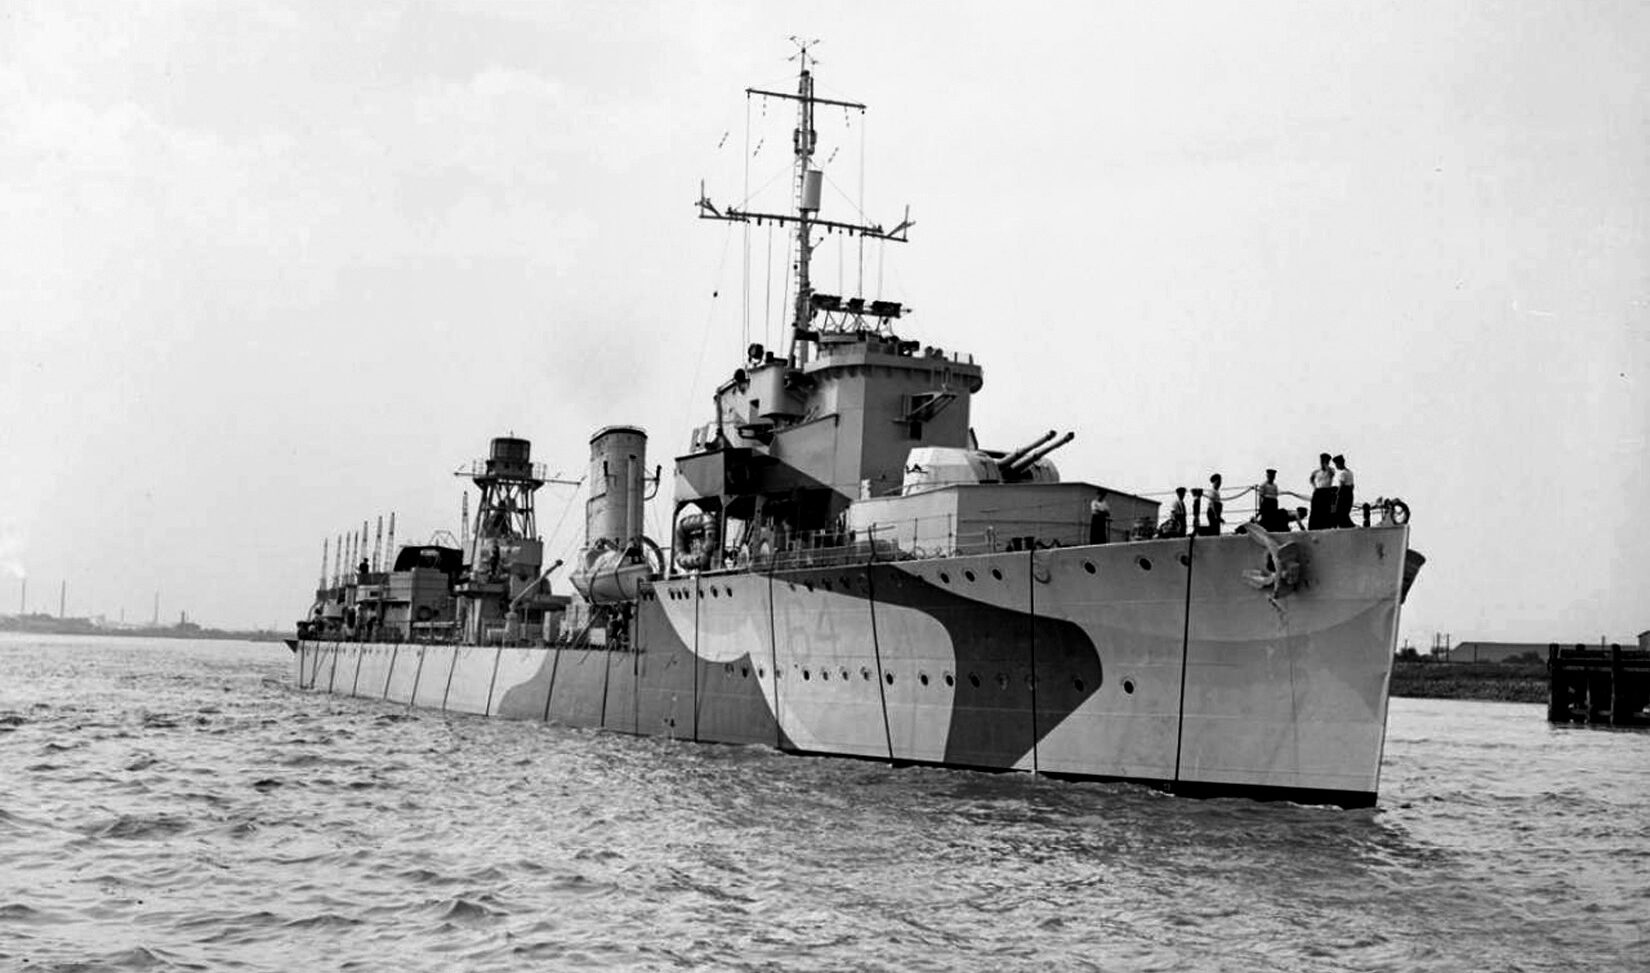 While serving aboard the destroyer HMS Wallace Prince Philip devised a ruse that fooled Nazi dive bombers and likely saved the ship, along with the lives of many sailors.